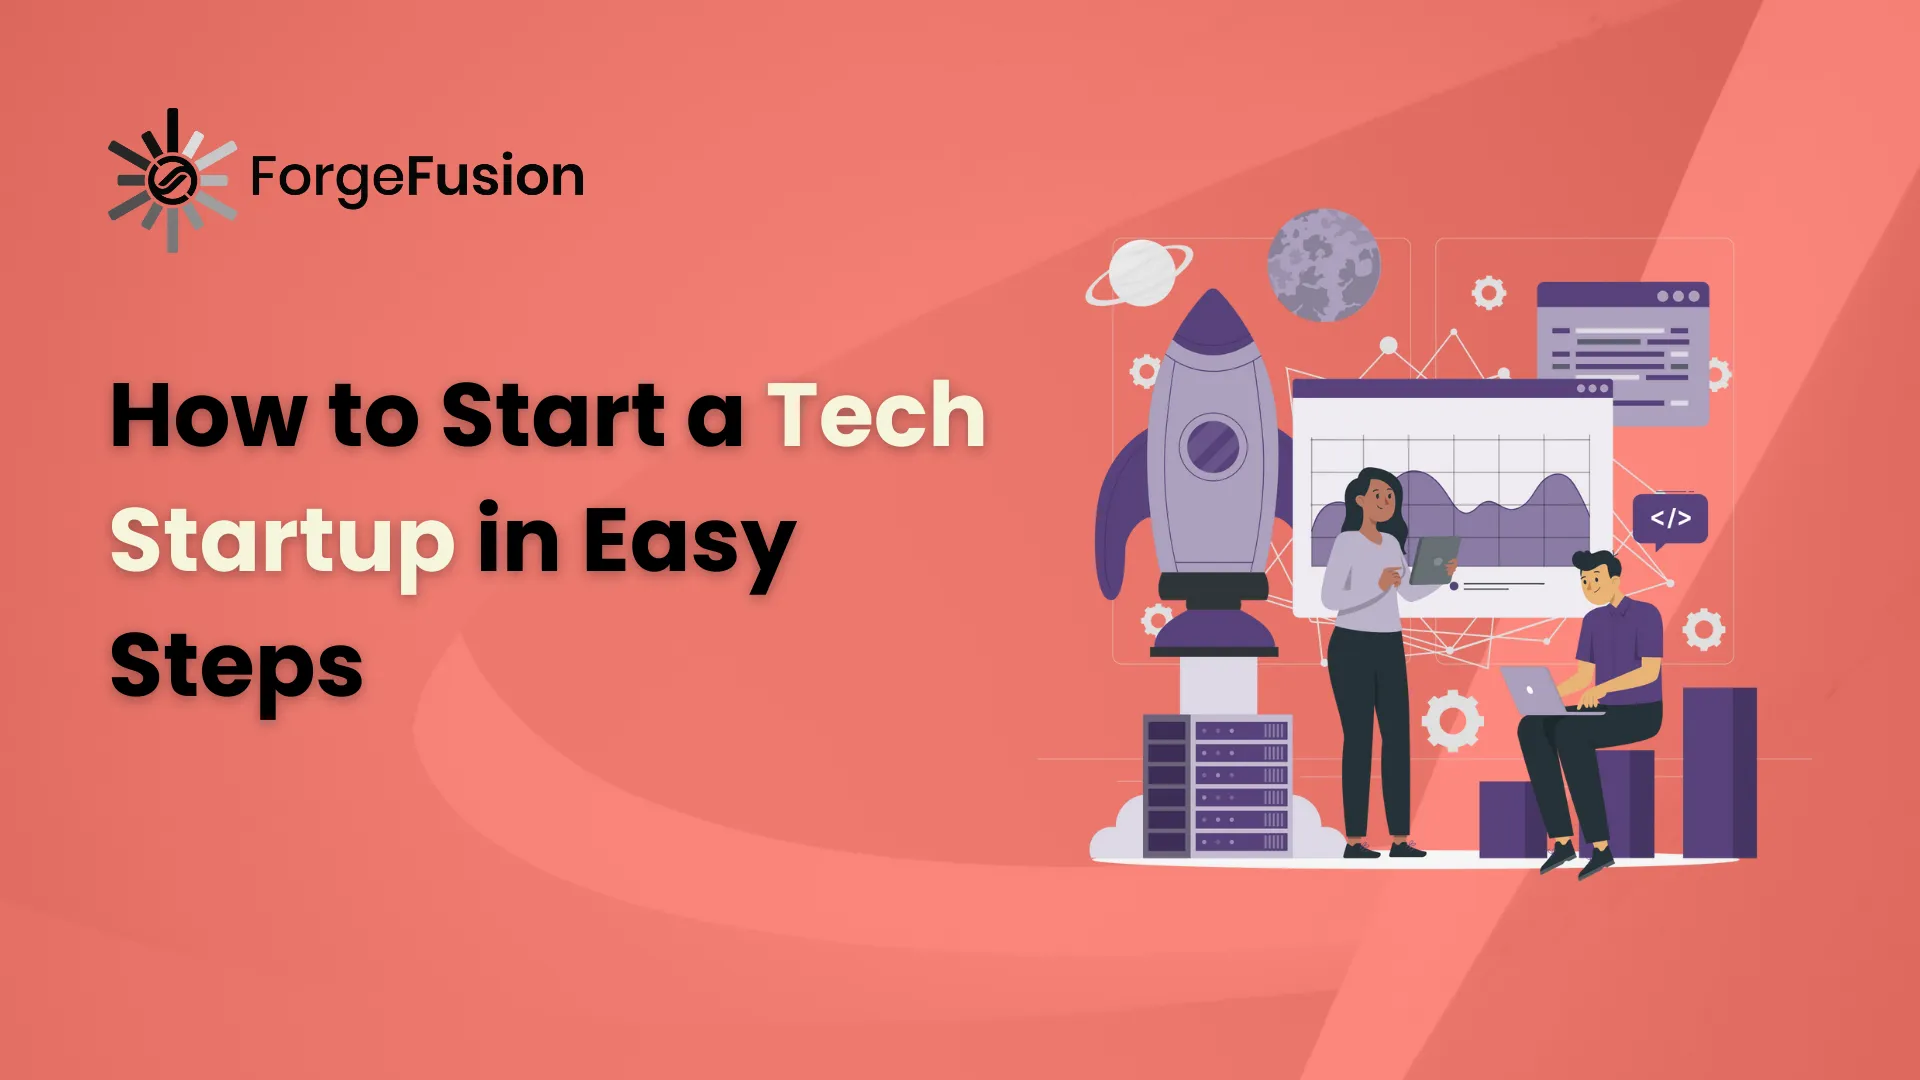 How to Start a Tech Startup in 10 Easy Steps